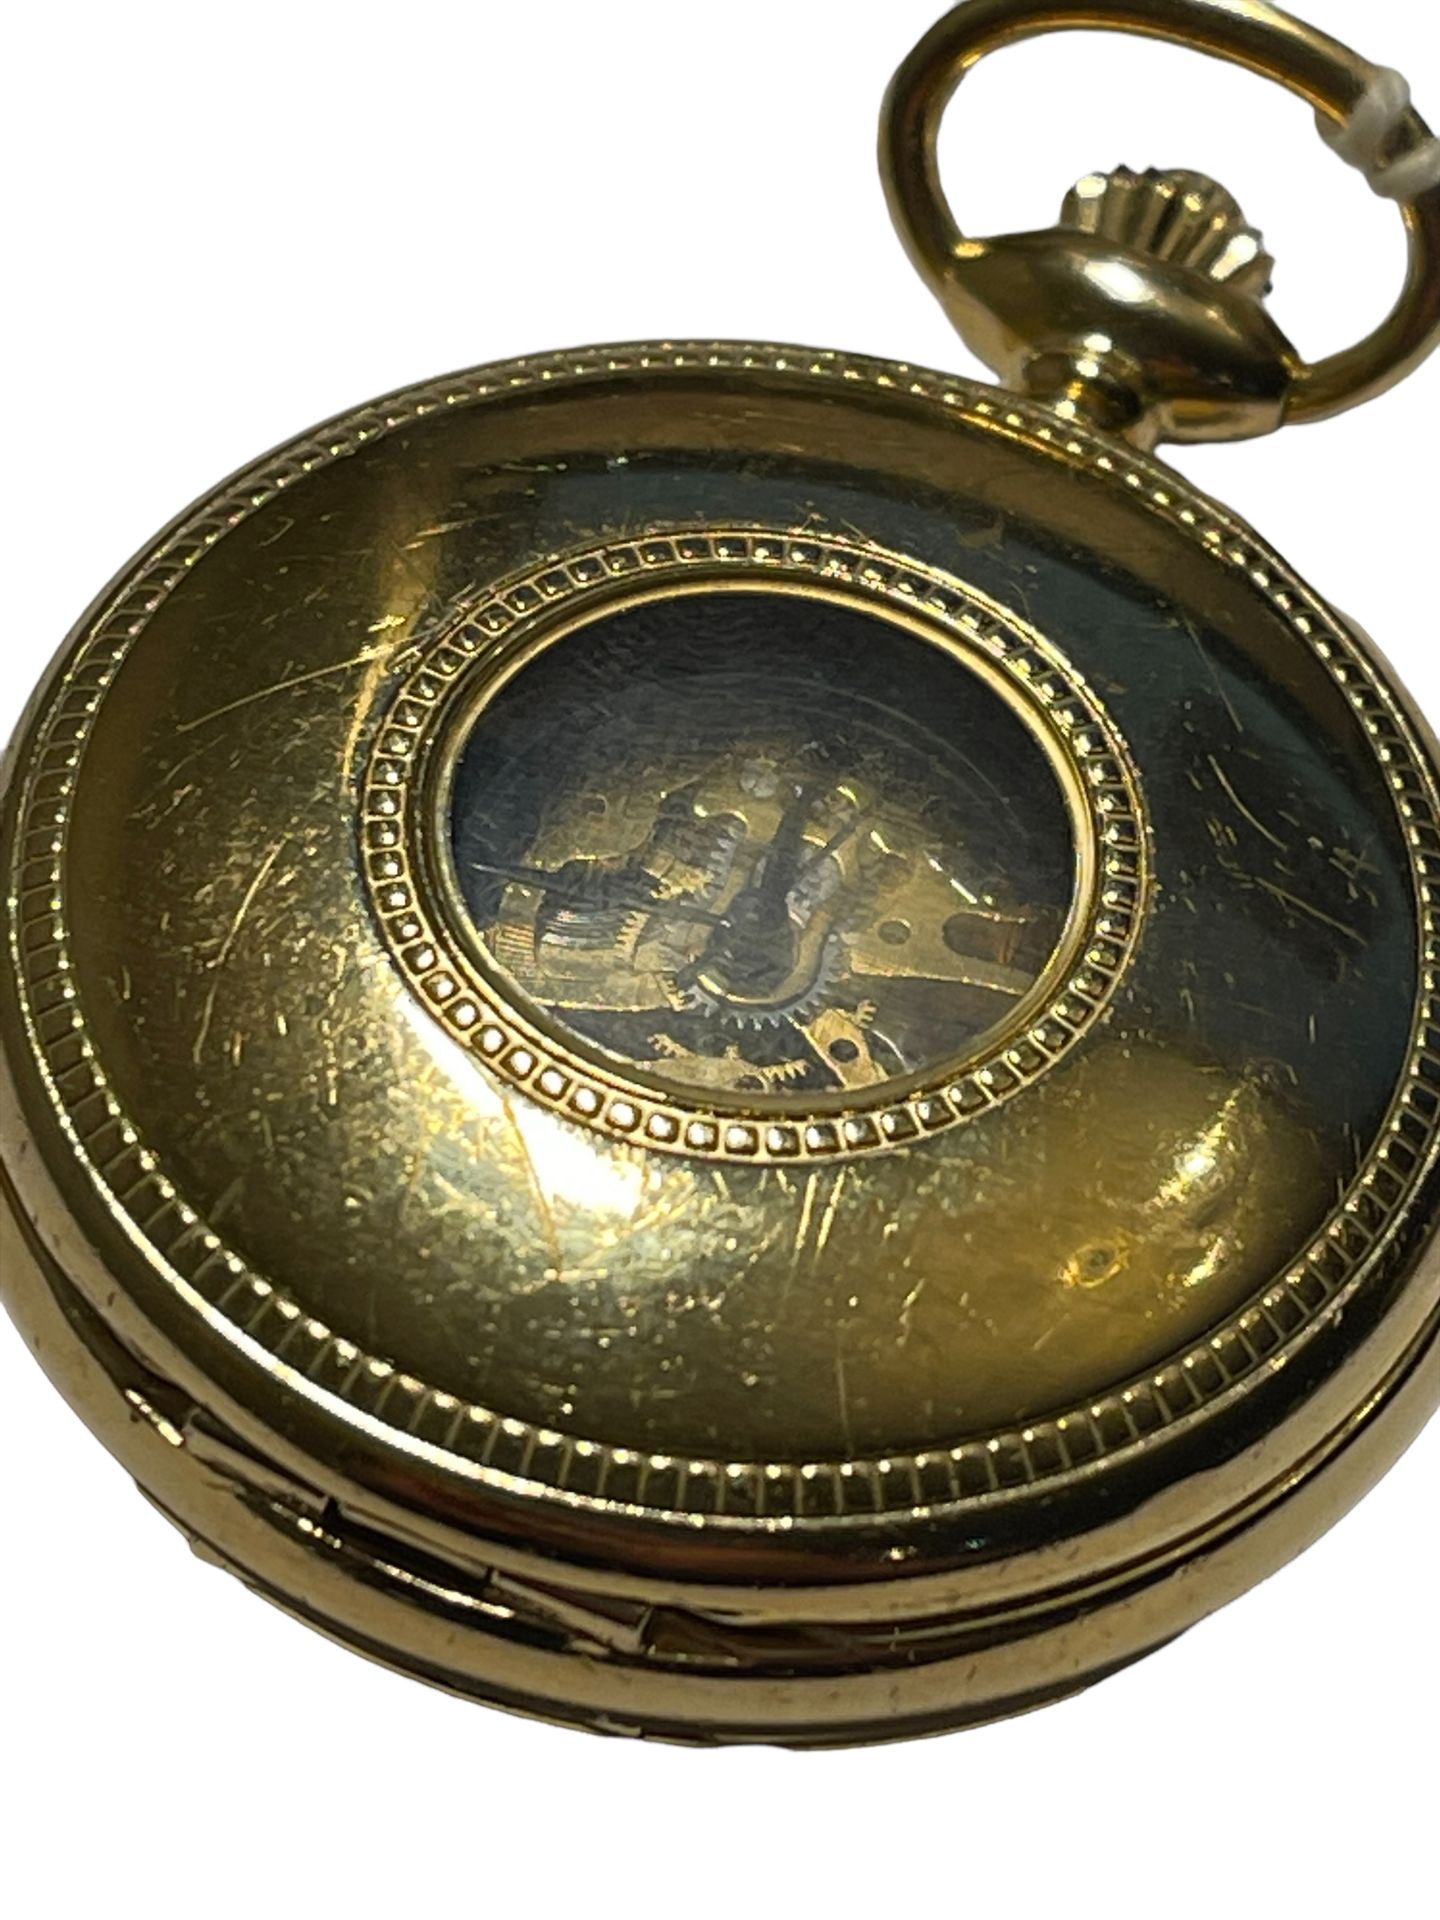 Gold Plated Mechanical Rotary Pocket Watch RRP £209 - Ex Demo from our Private Jet Charter - Image 5 of 11